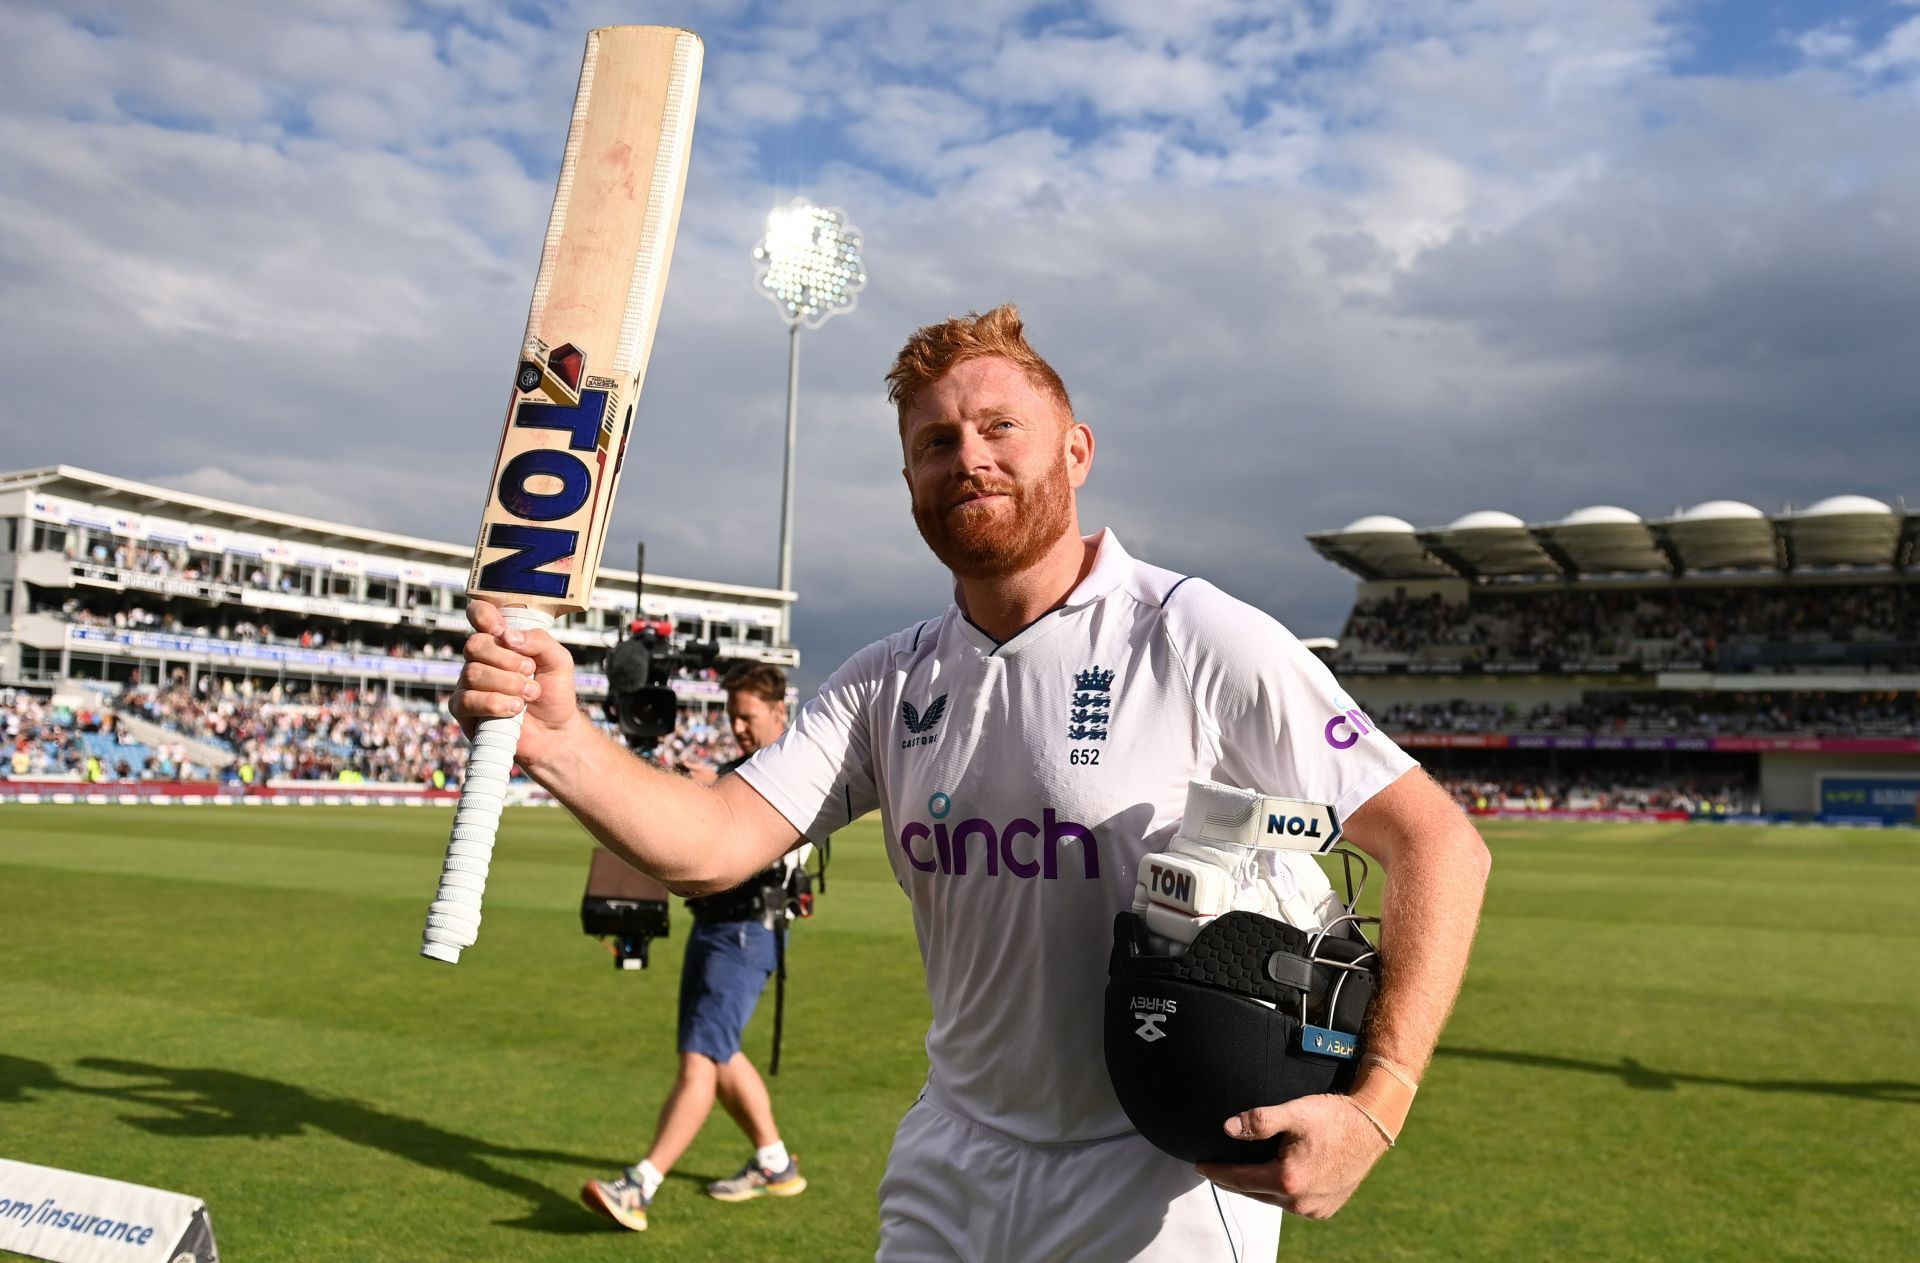 The England middle order batter produced another century for the ages